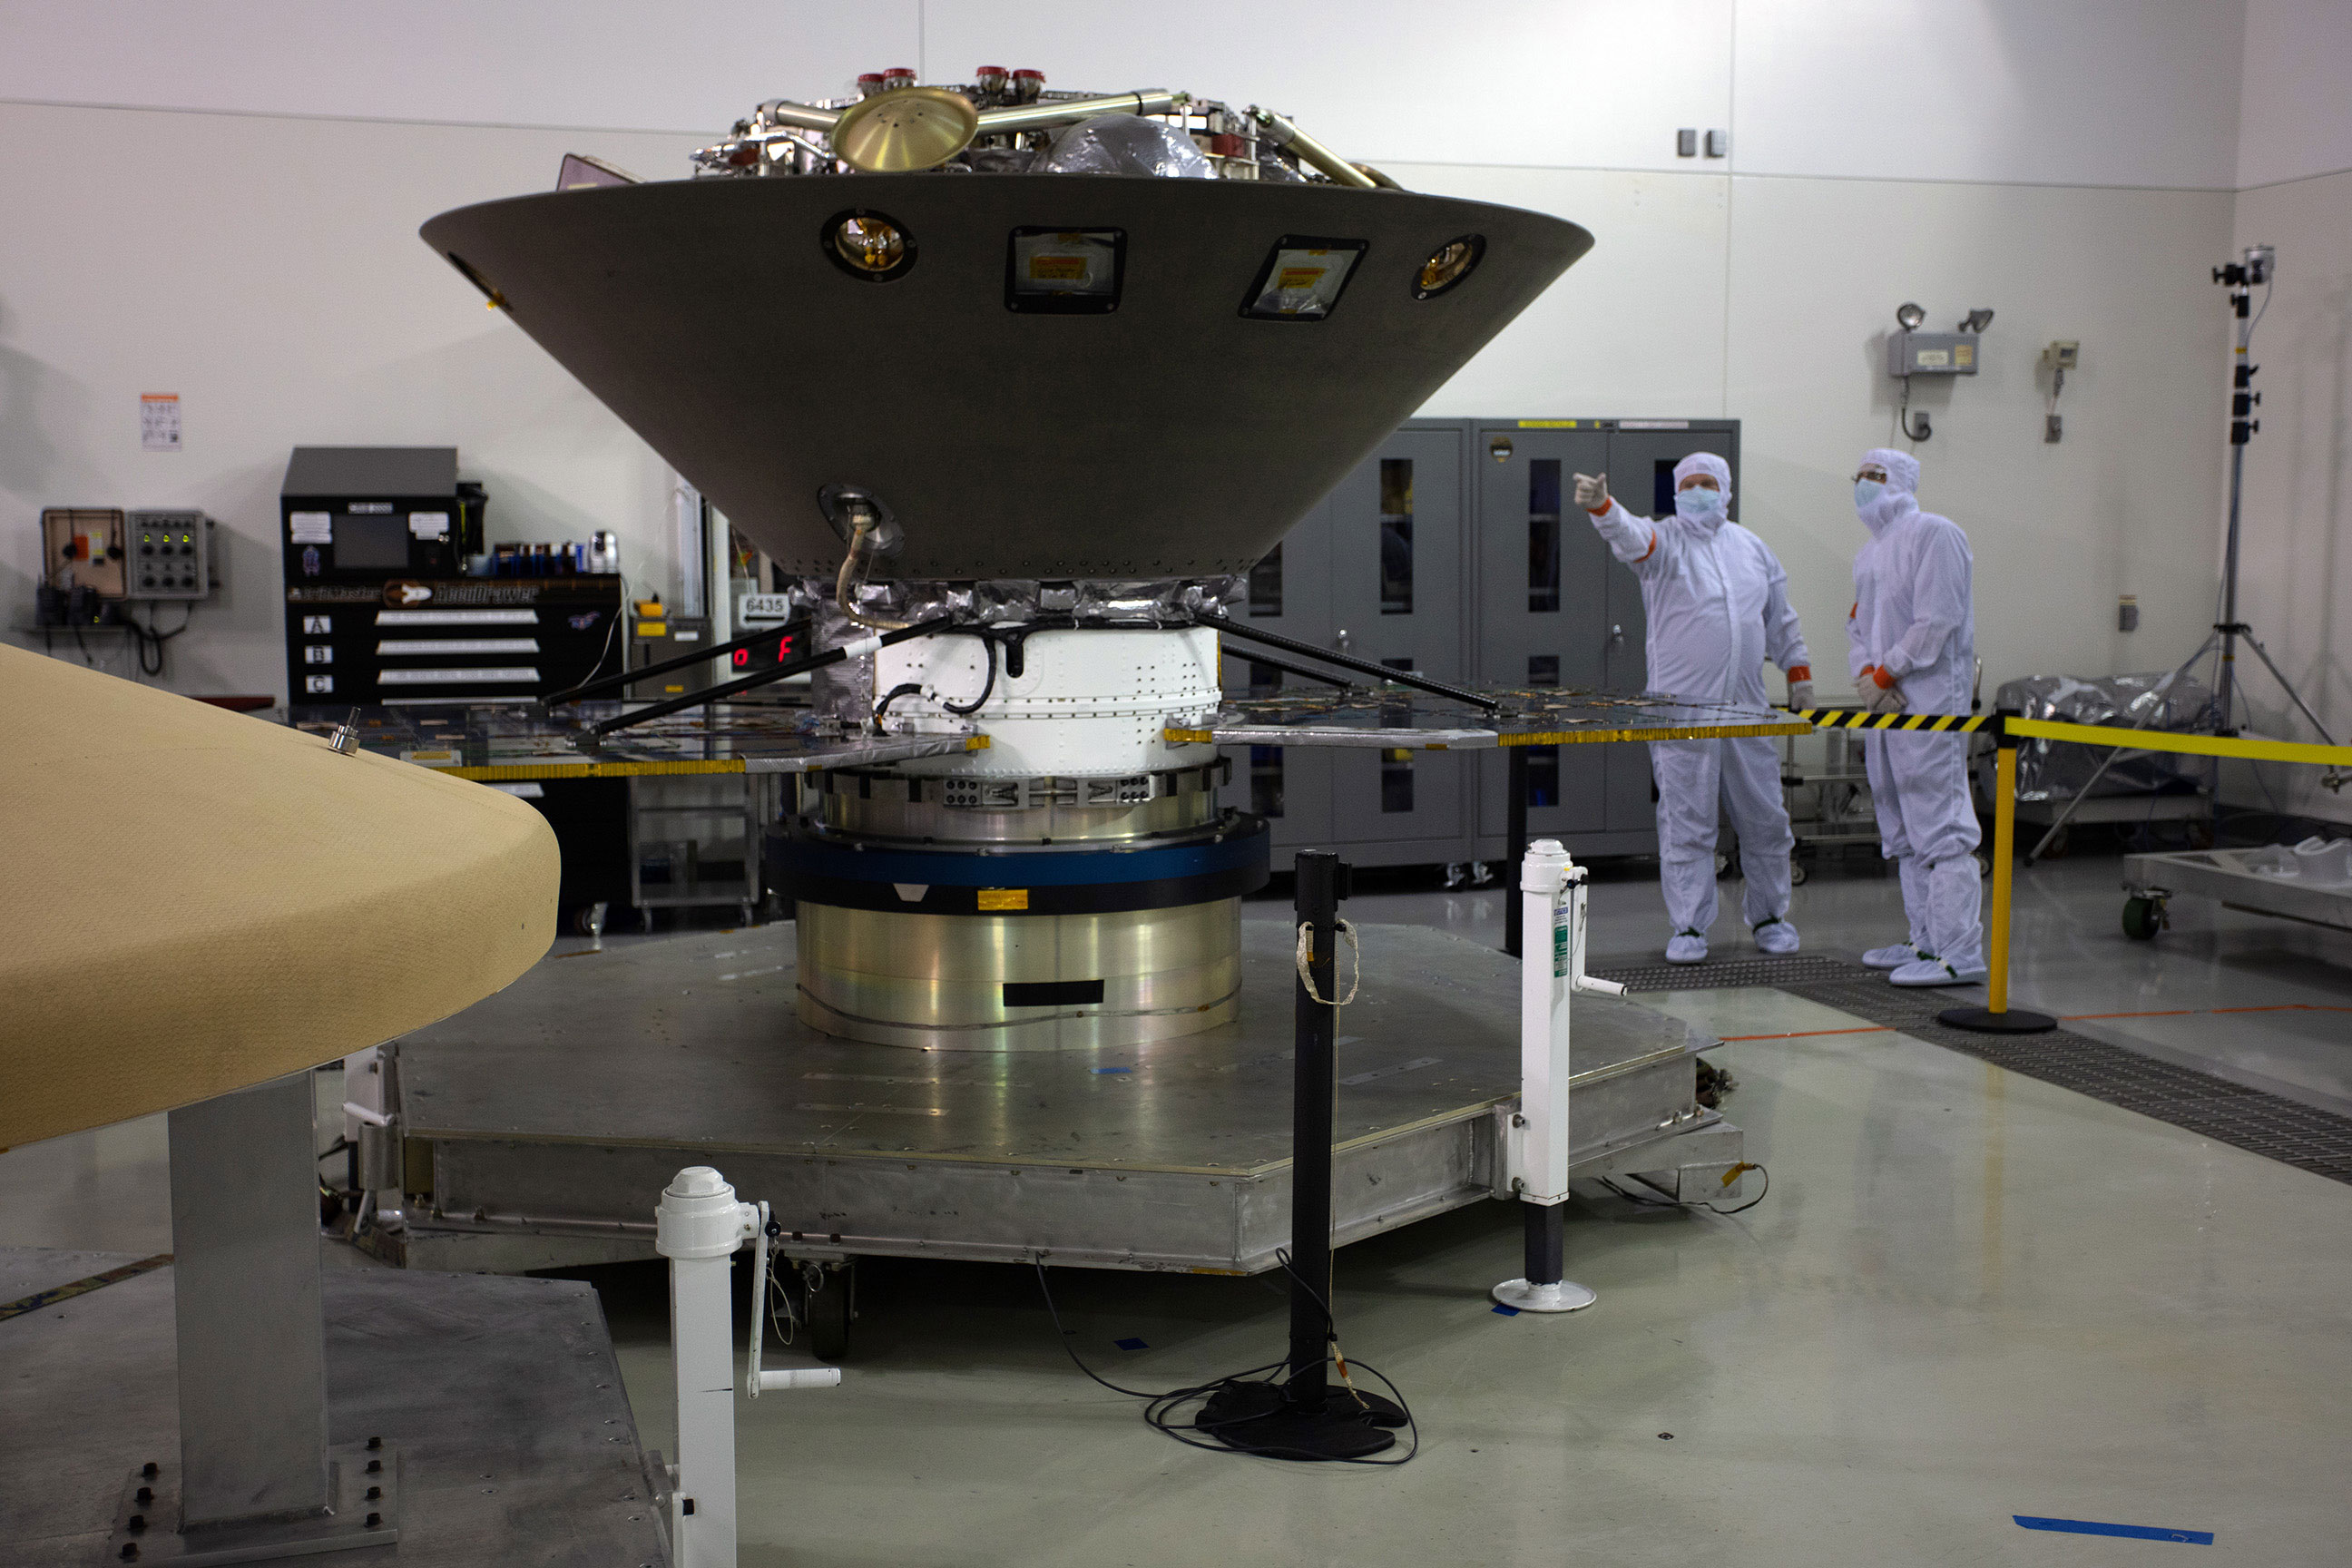 InSight in the Astrotech cleanroom at Vandenberg Air Force Base in final preparations for launch.  Only part of the lander’s legs are visible above the aeroshell capsule that will protect it on the 6-month journey to Mars.  Photo: Jon Brack